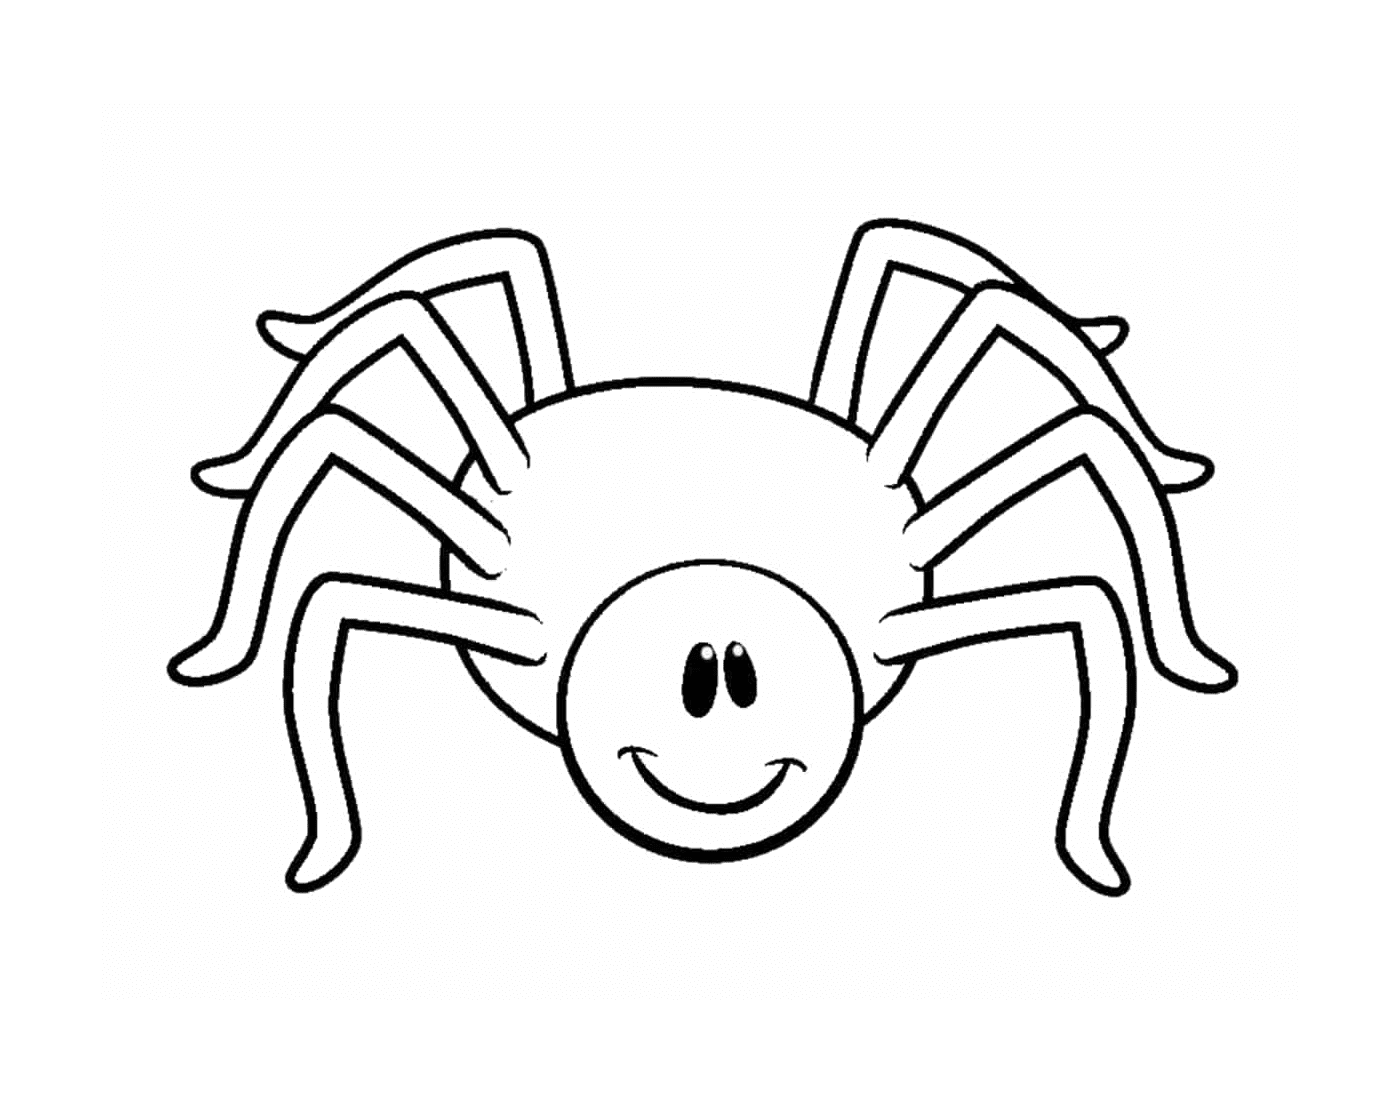  A smiling spider 